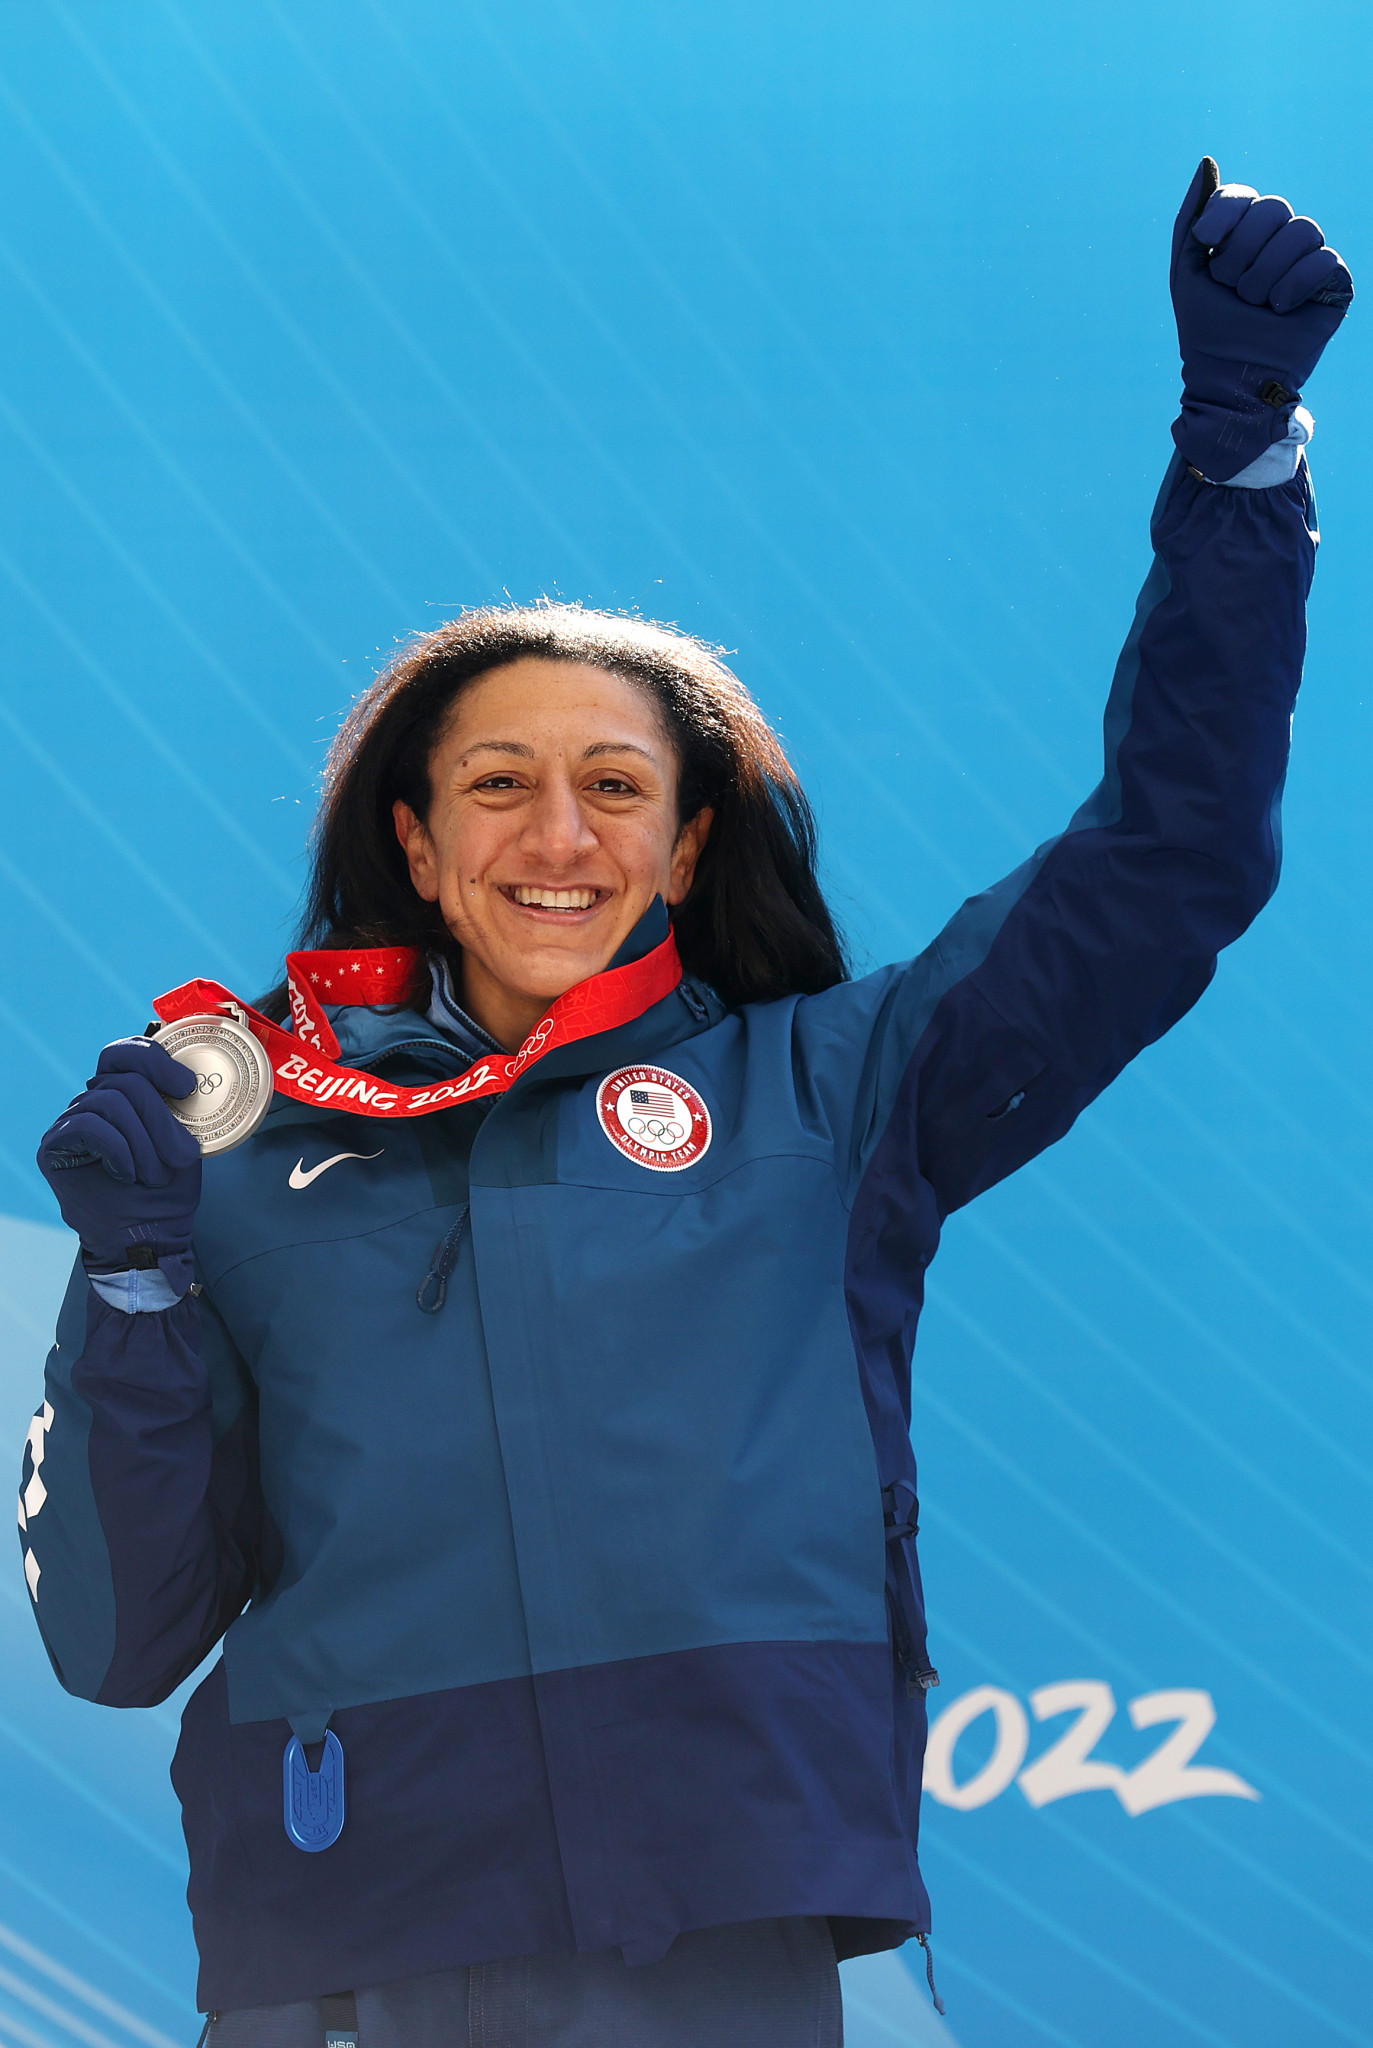 Five-time Olympic bobsleigh medallist Elana Meyers Taylor is set to join the USOPC Board from the start of next year ©Getty Images